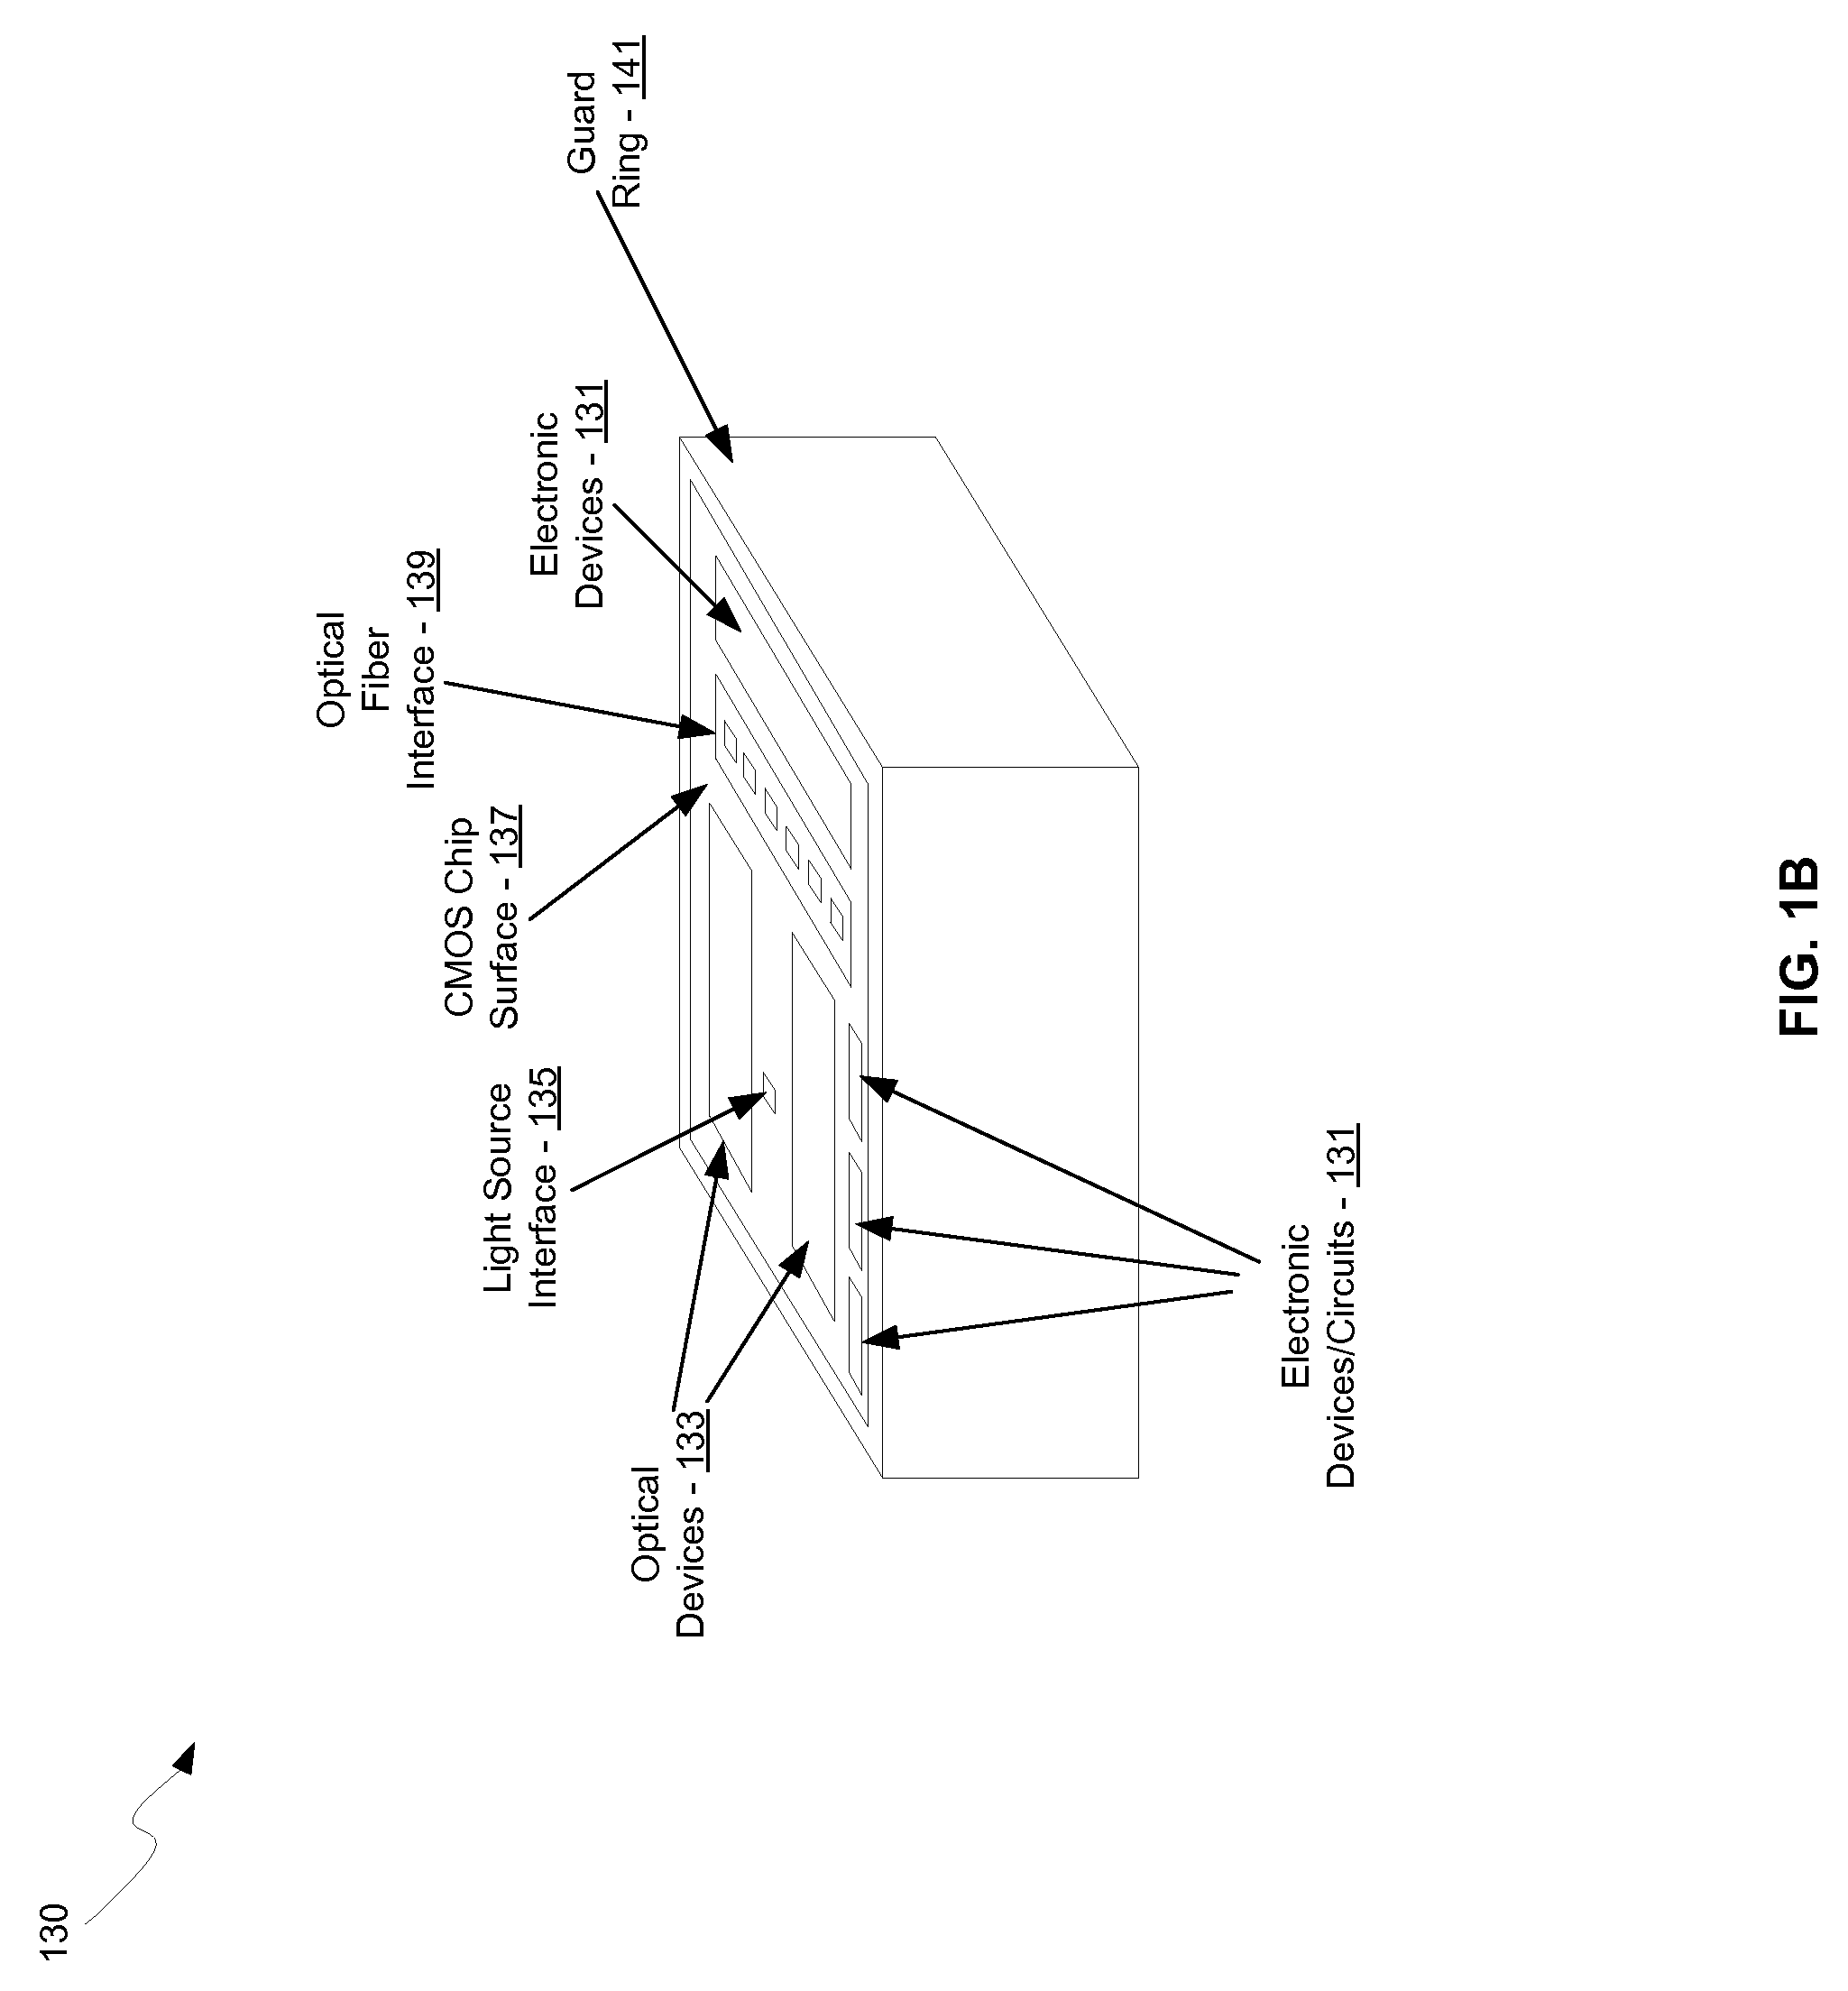 Method and system for optoelectronics transceivers integrated on a CMOS chip